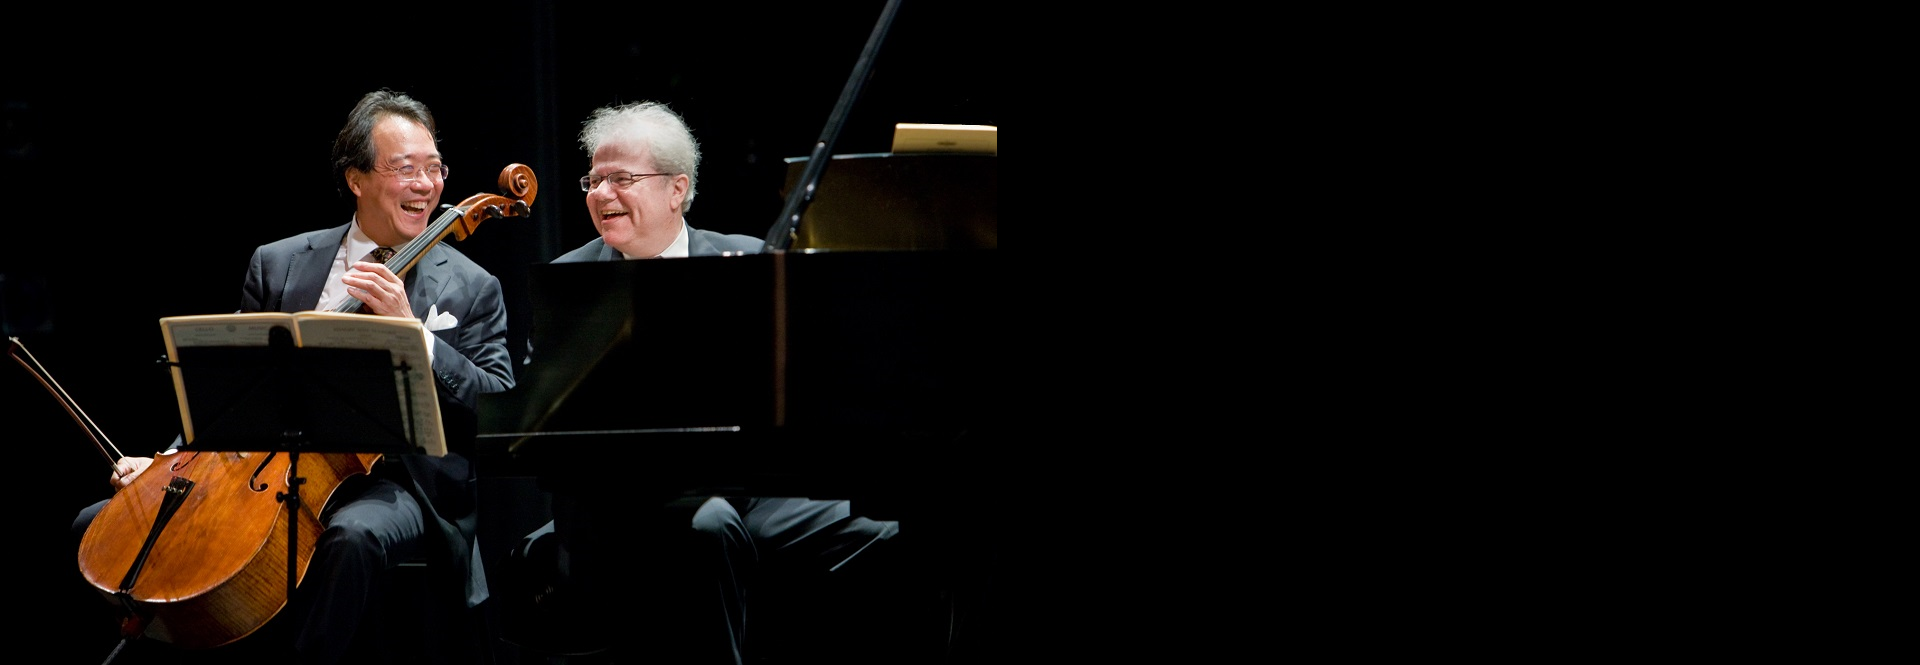 Yo-yo Ma & Emanuel Ax playing our Steinway D at the Mahaiwe Performing Arts Center in Great Barrington, MA.